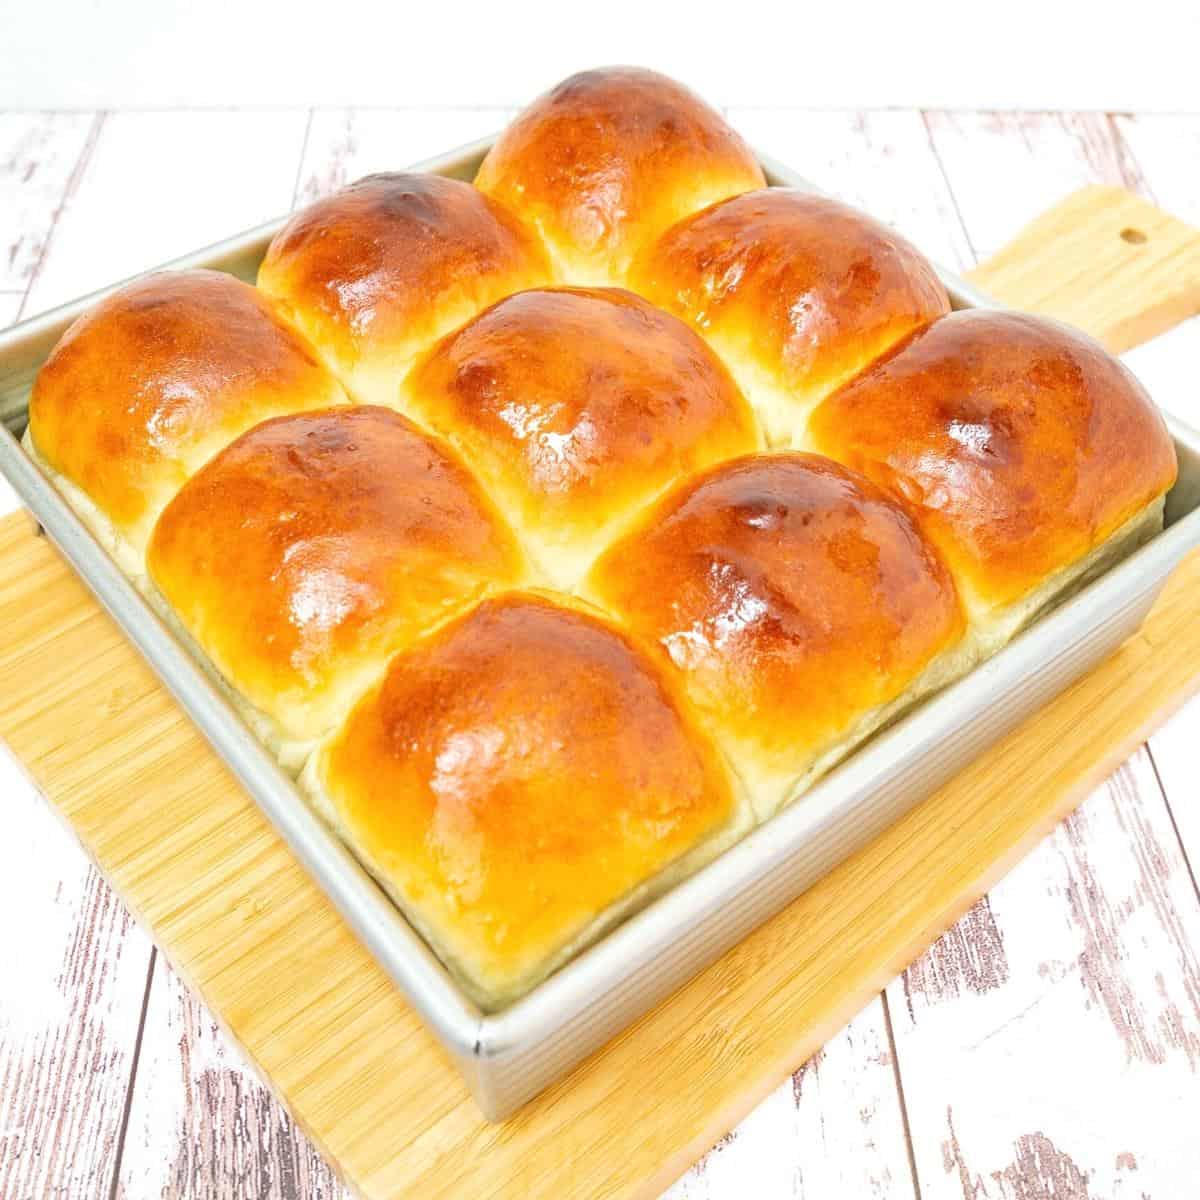 A wooden board with dinner rolls.